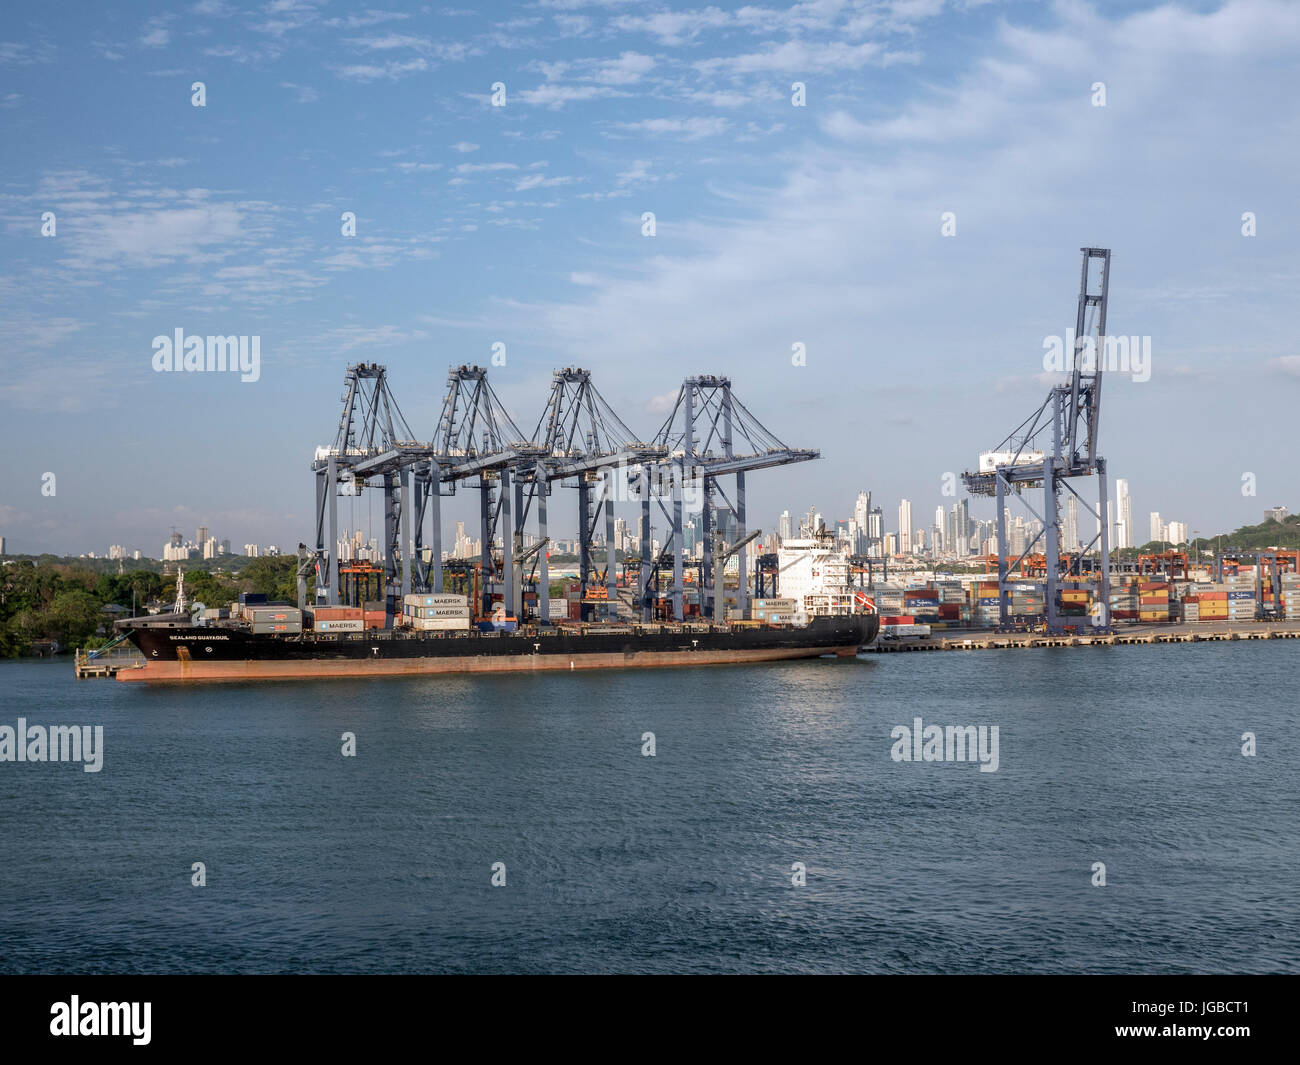 Large Cranes Load A Container Ship At The Port Of Balboa Panama City Stock Photo